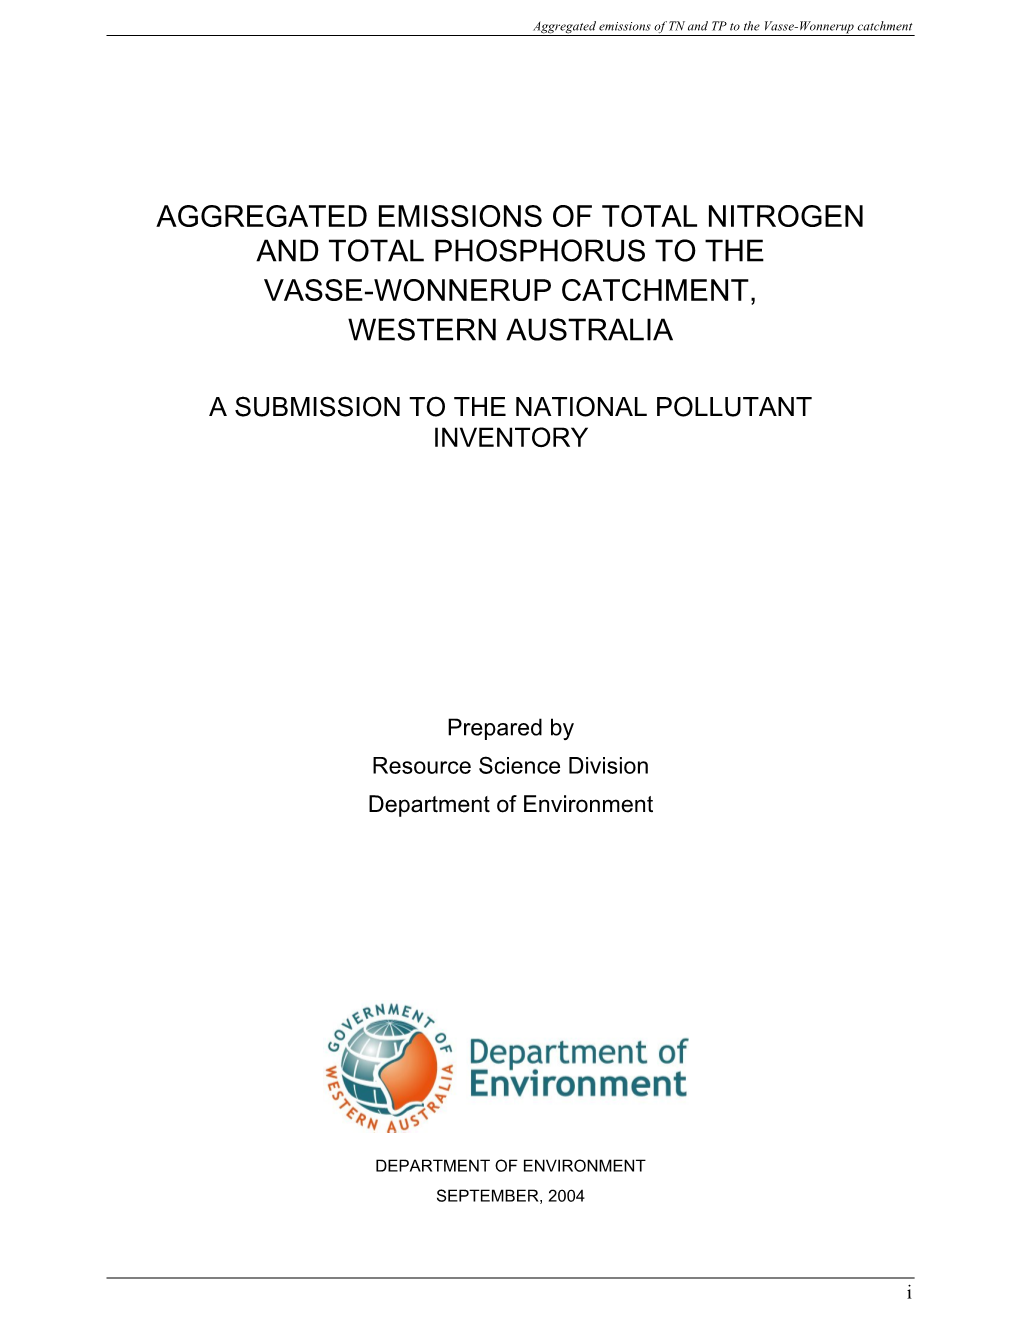 Aggregated Nutrient Emissions to the WA Vasse-Wonnerup Water